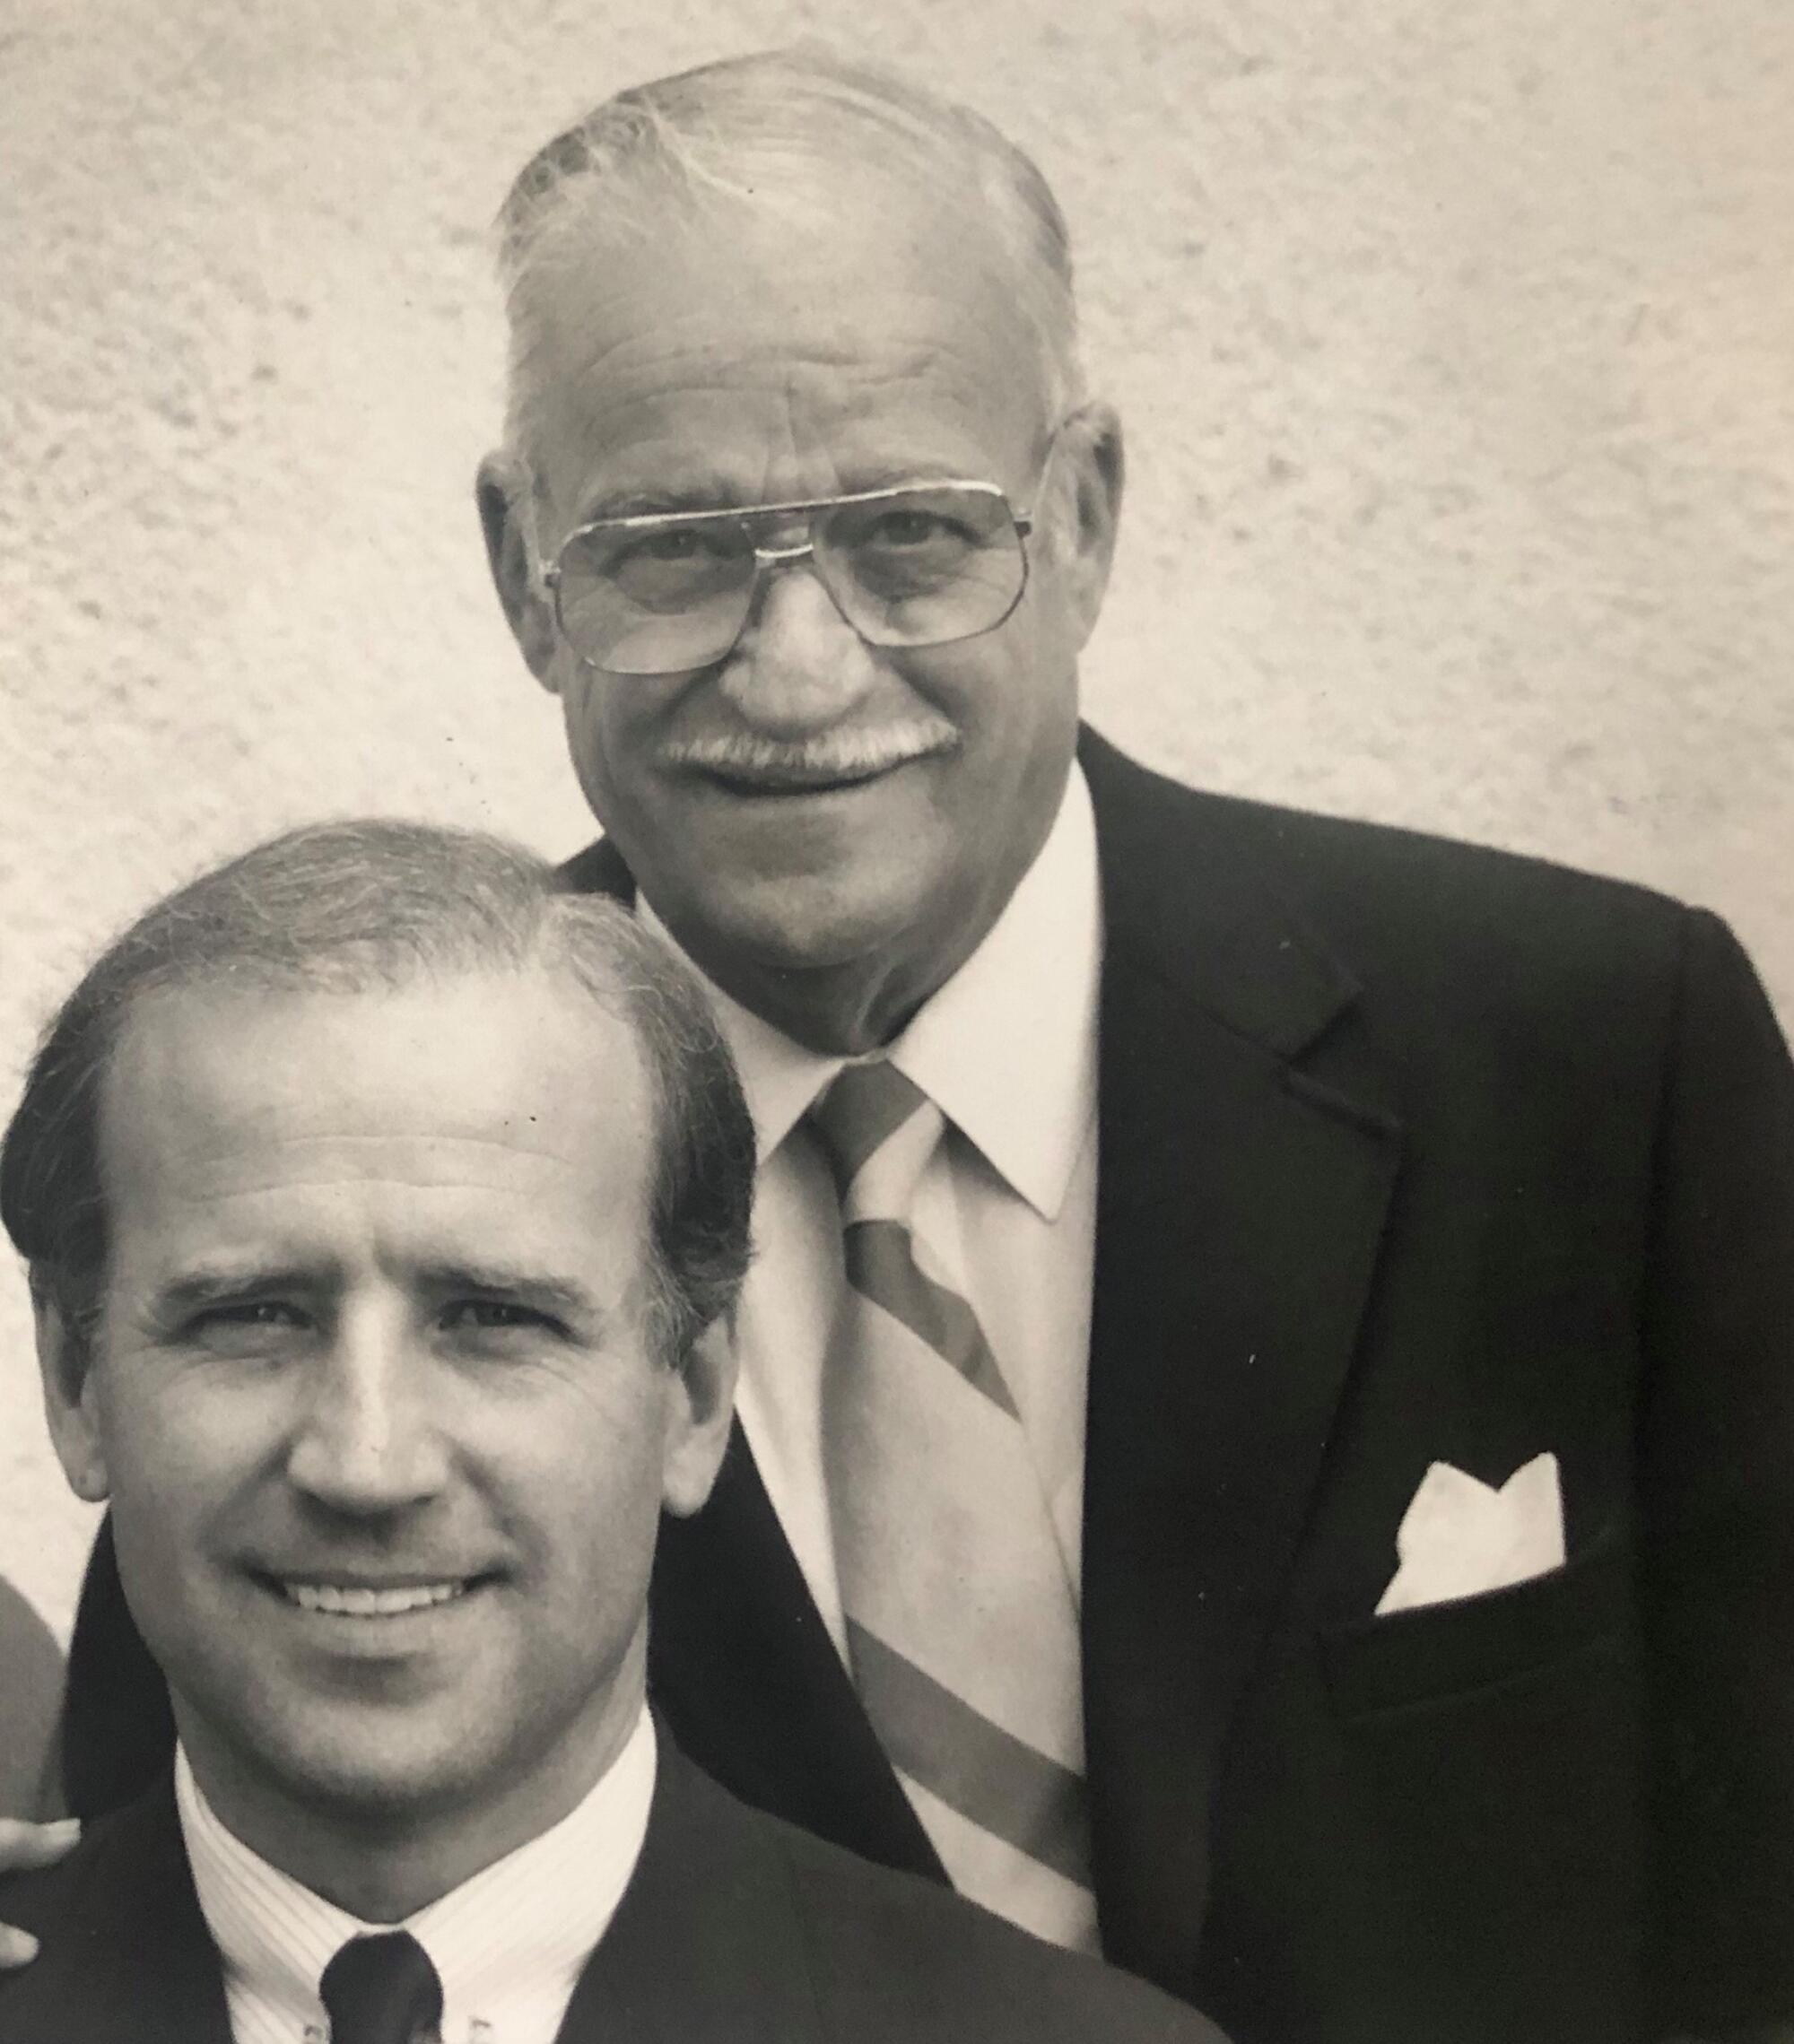 A man in a suit and tie with another older man, both wearing a suit and tie and smiling